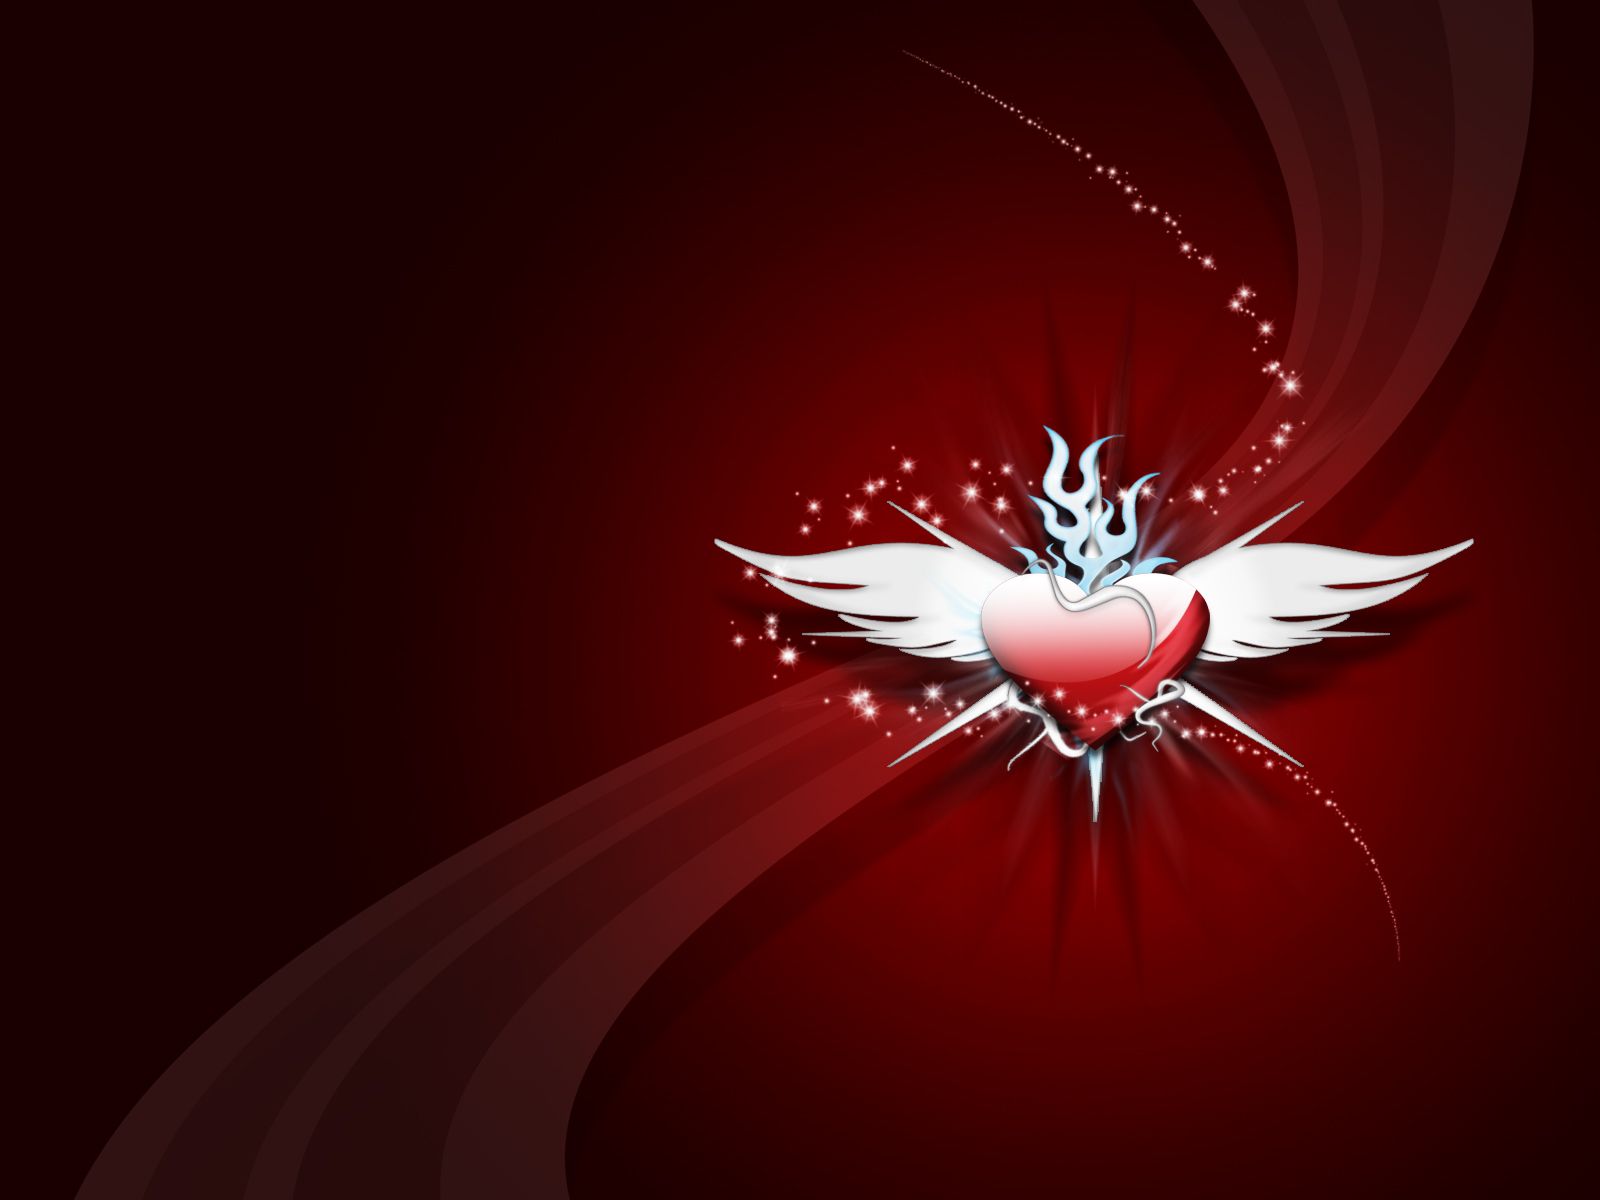 683 Love HD Wallpapers Backgrounds - Wallpaper Abyss